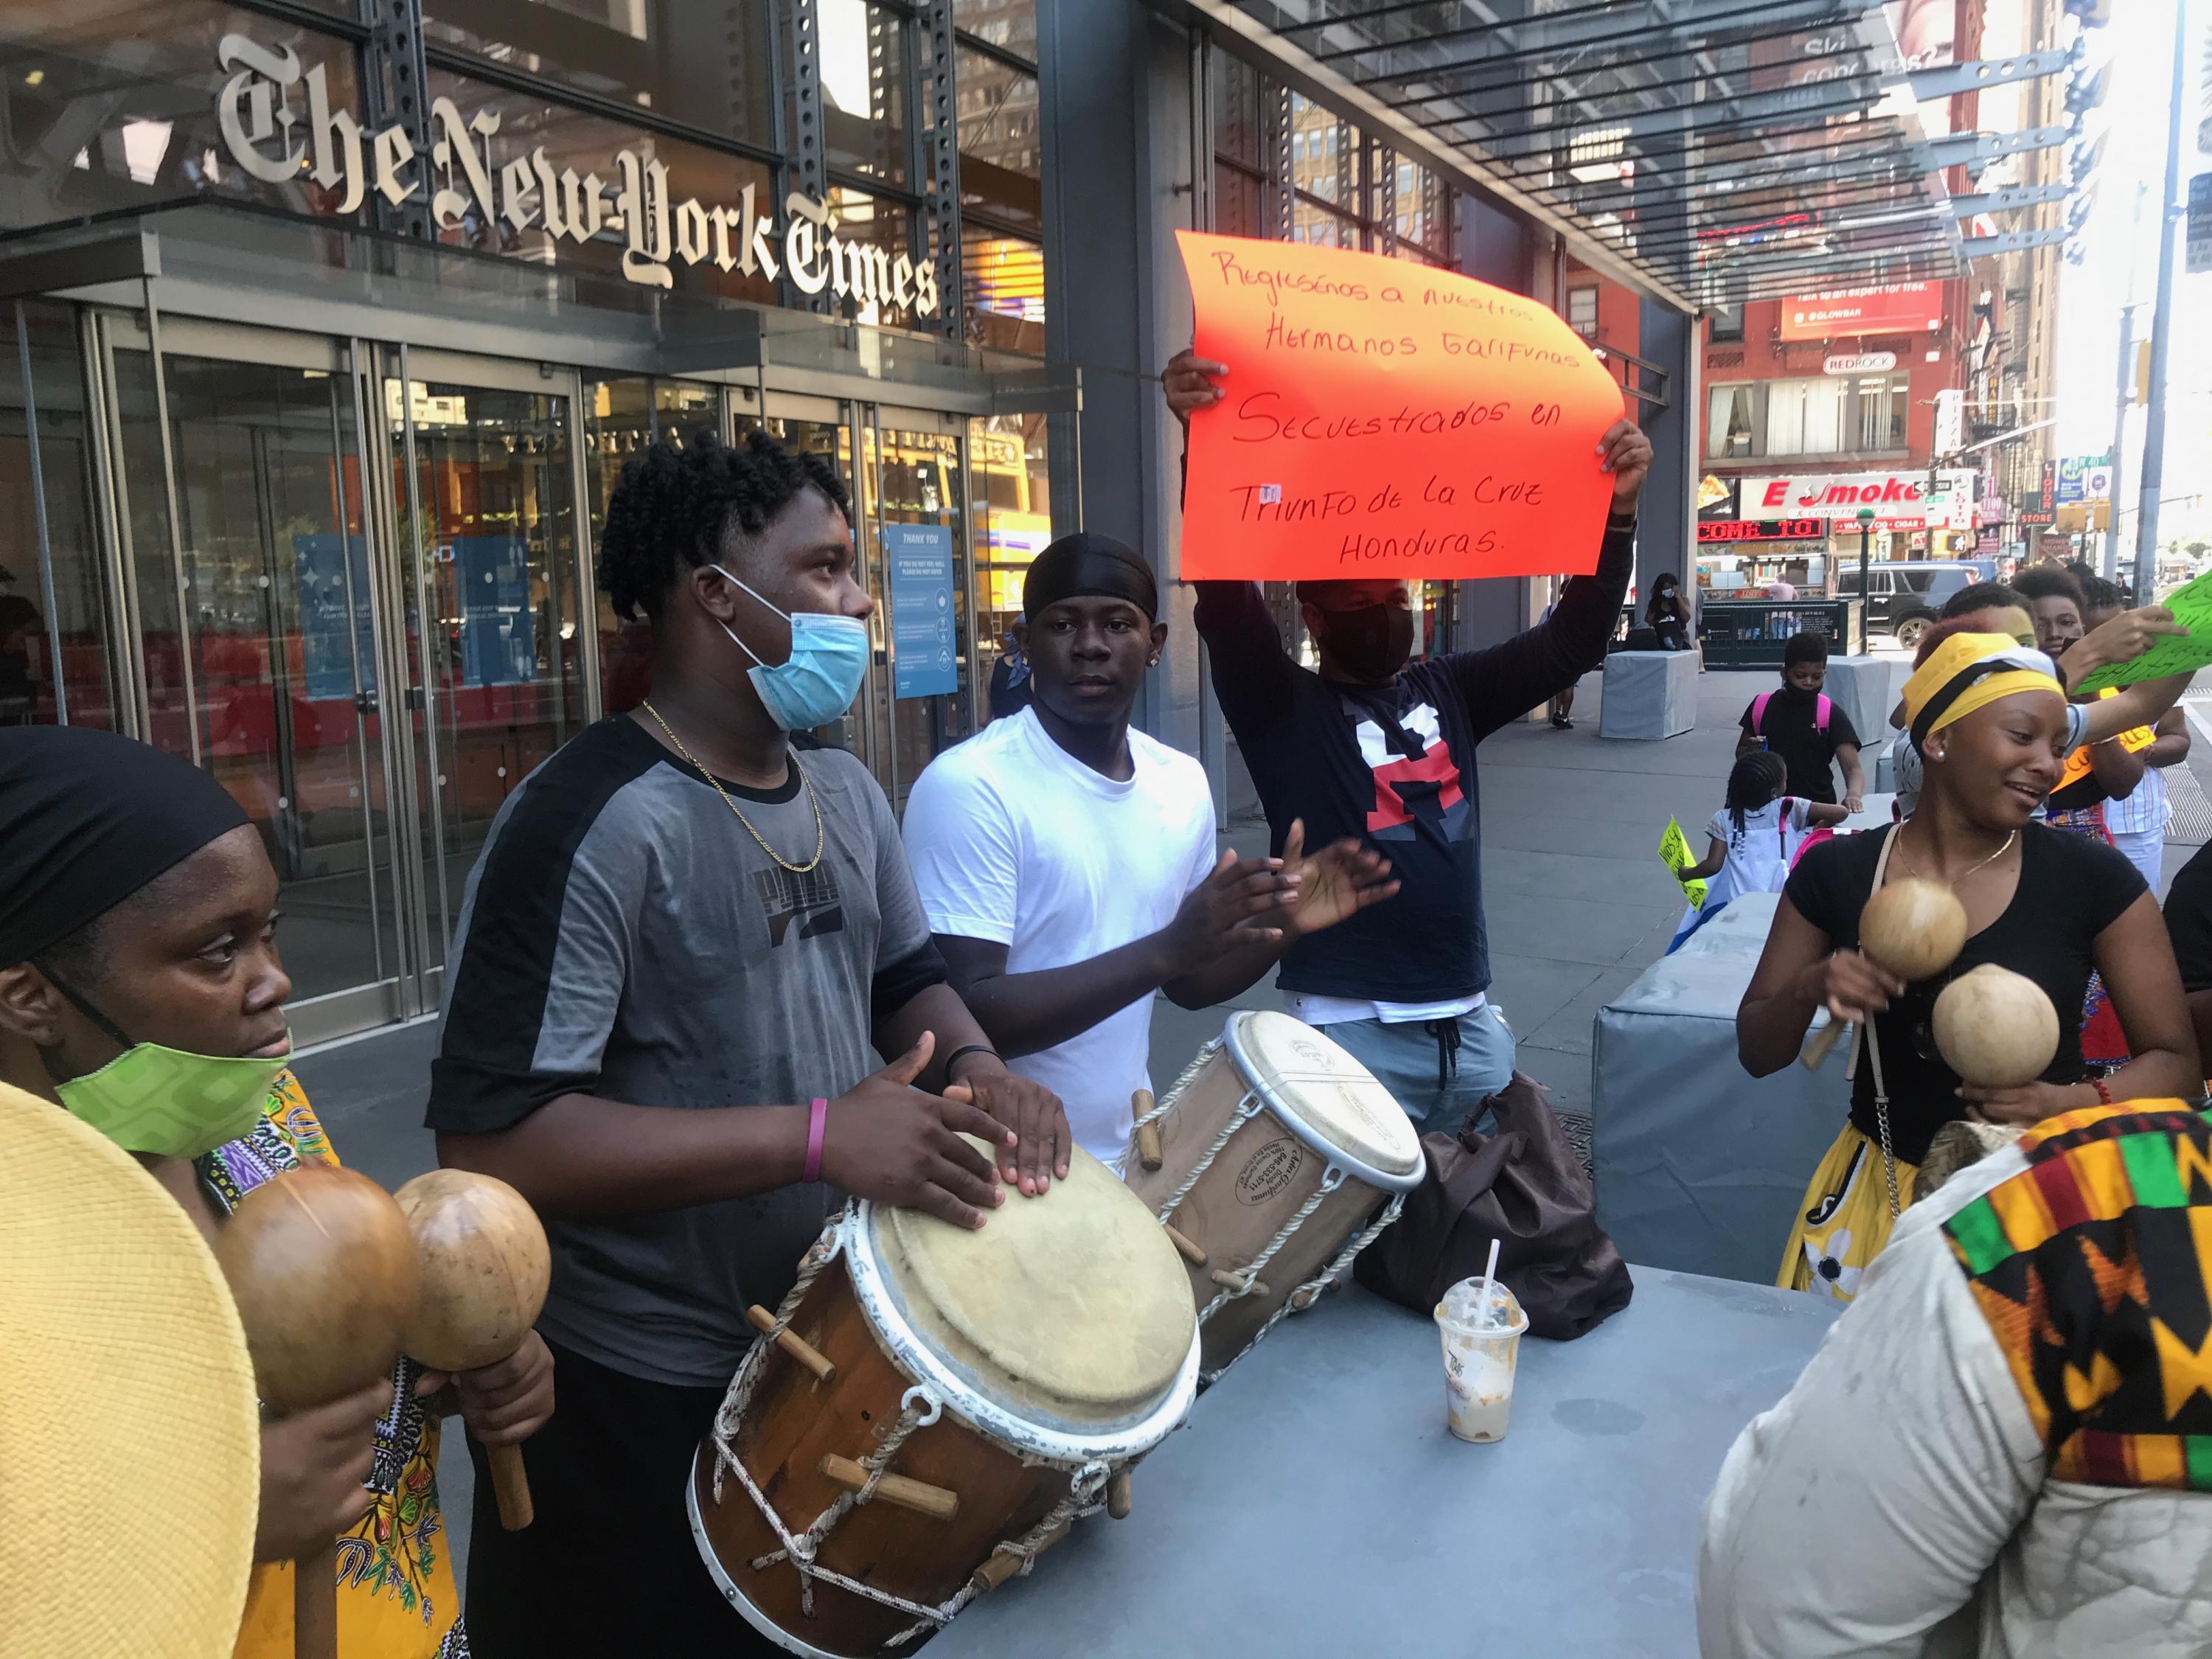 Demonstrators assembled outside the New York Times building on Monday, July 20 to protest recent state-sanctioned violence against Garifuna communities along the Honduran coast and the sustained partnership between the Trump administration and the Honduran government. Photo: Roman Gressier/El Faro